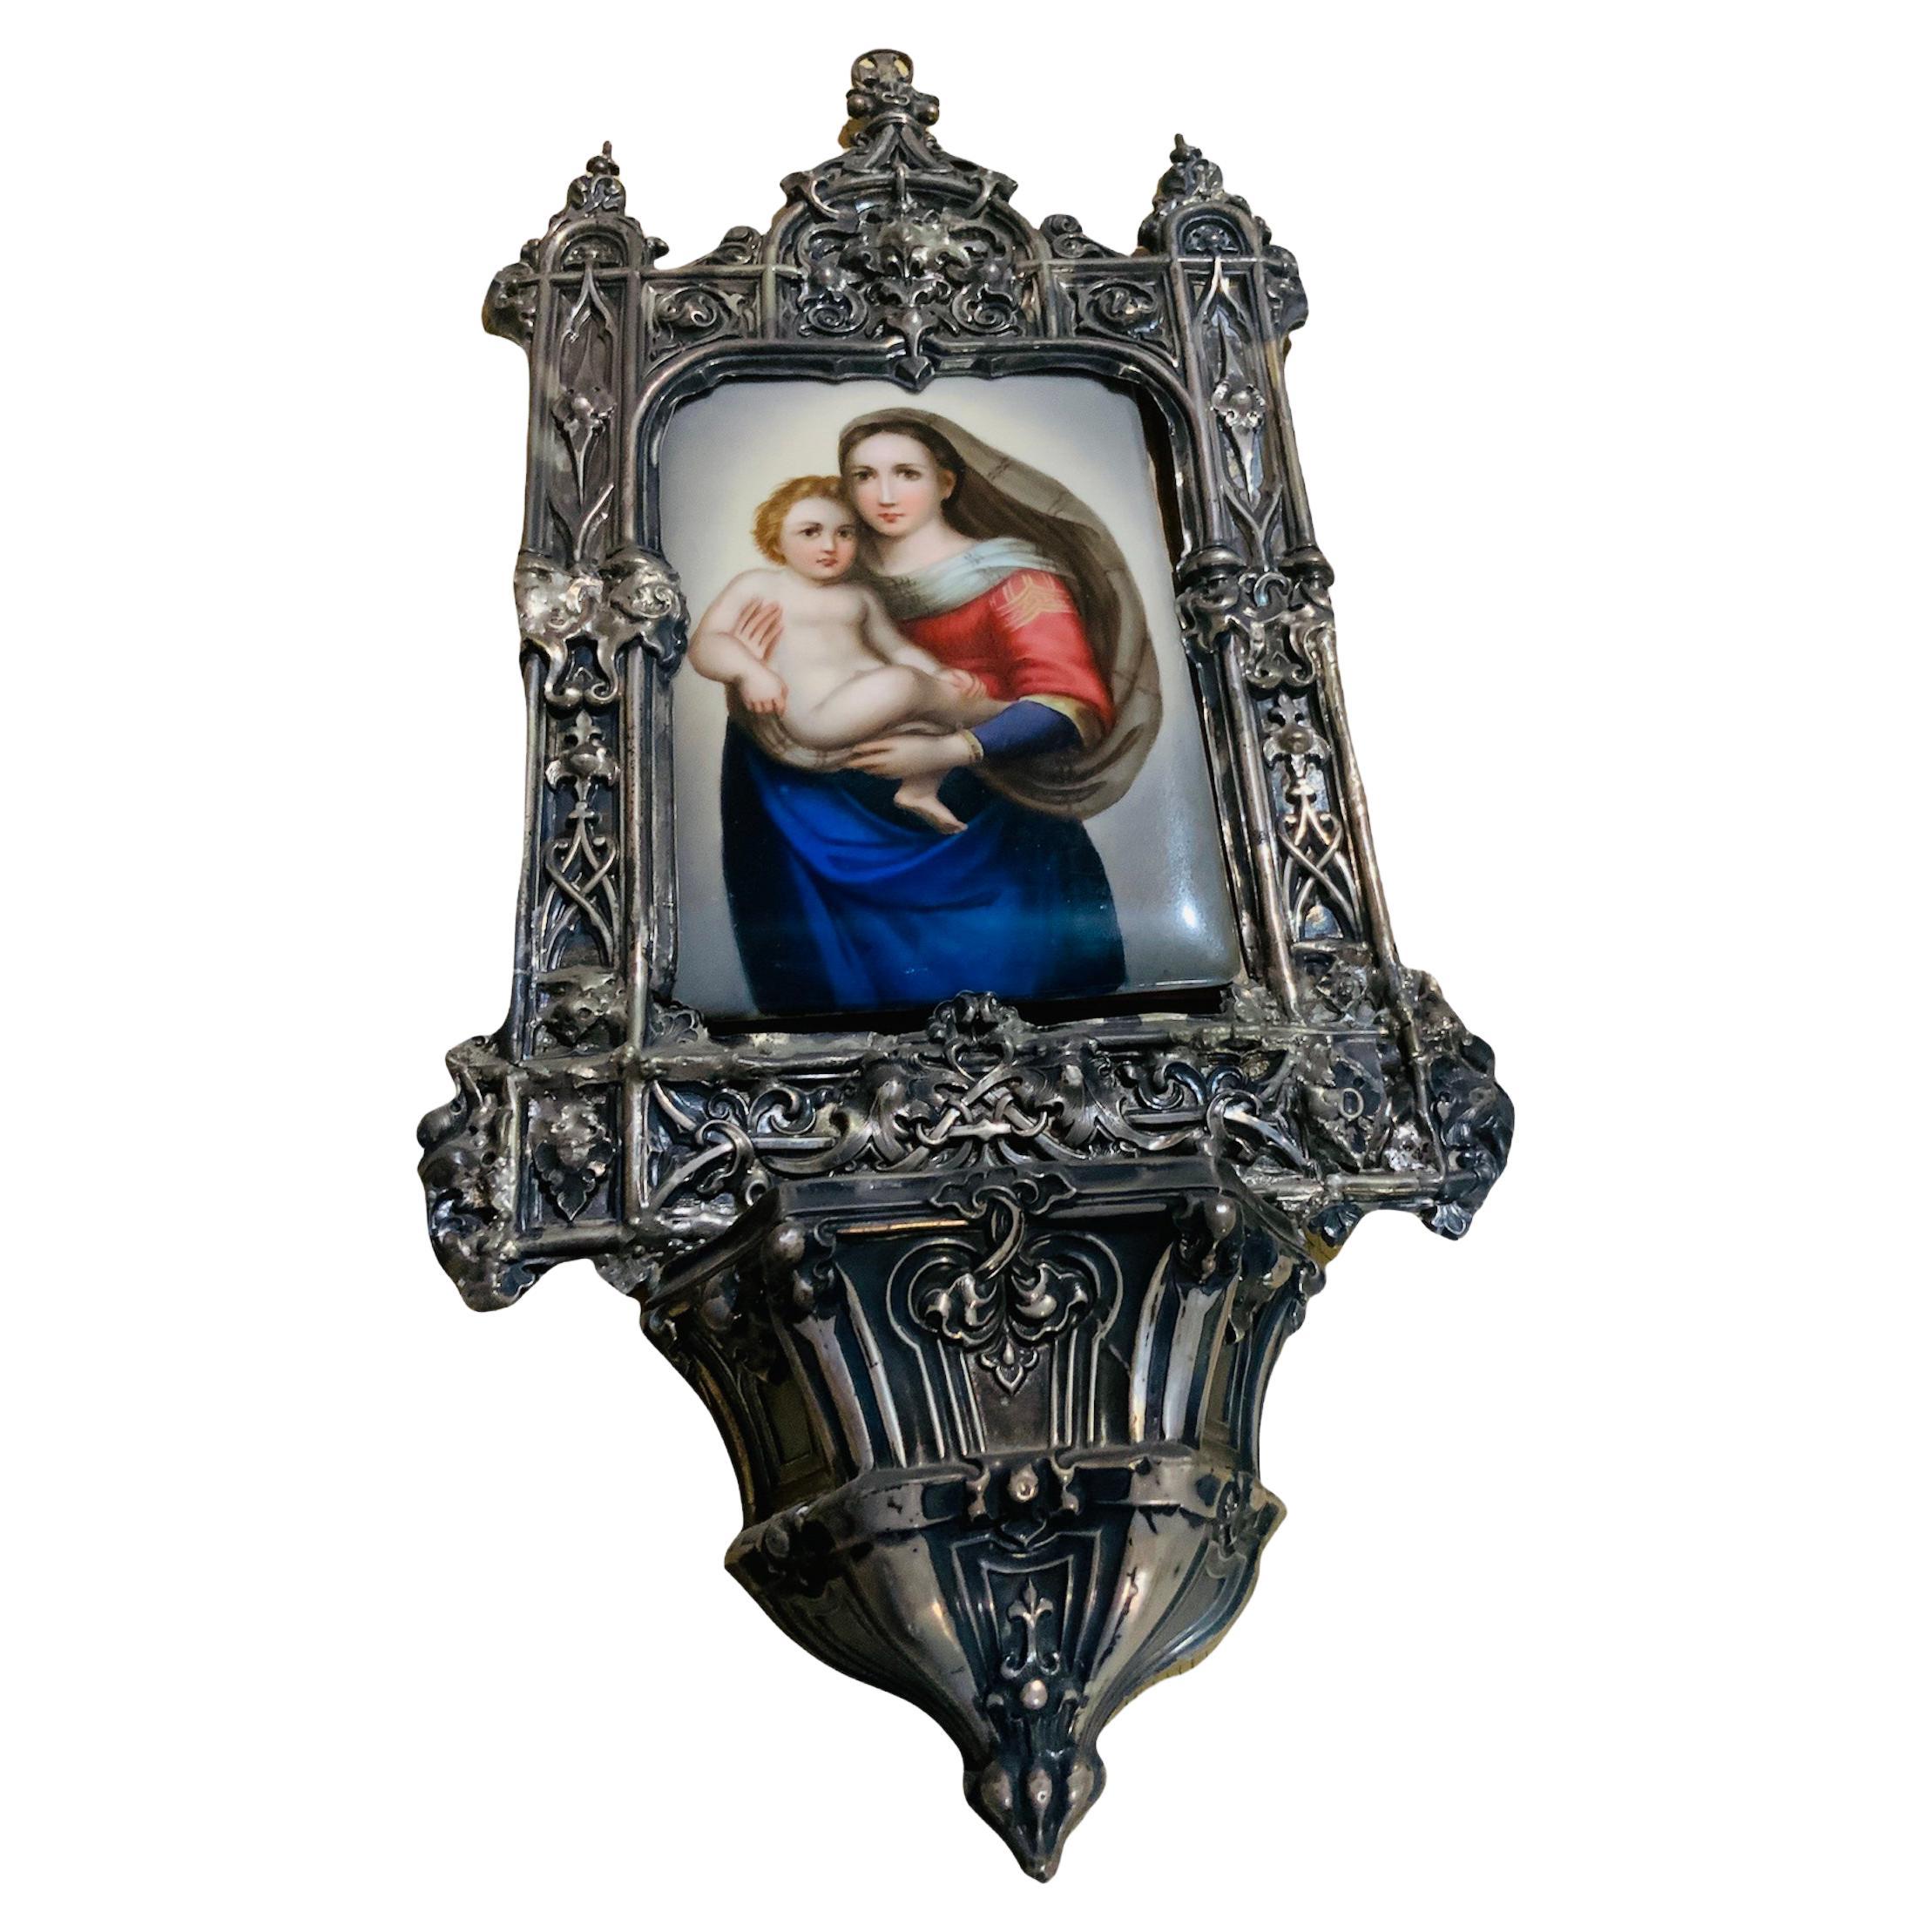 This is a hand painted KPM style rectangular plaque of the Sistine Madonna framed in a wall brass holy water font. The brass frame depicts three arcs, two small semicircular in the sides and a large ogee in the center. All of them decorated with